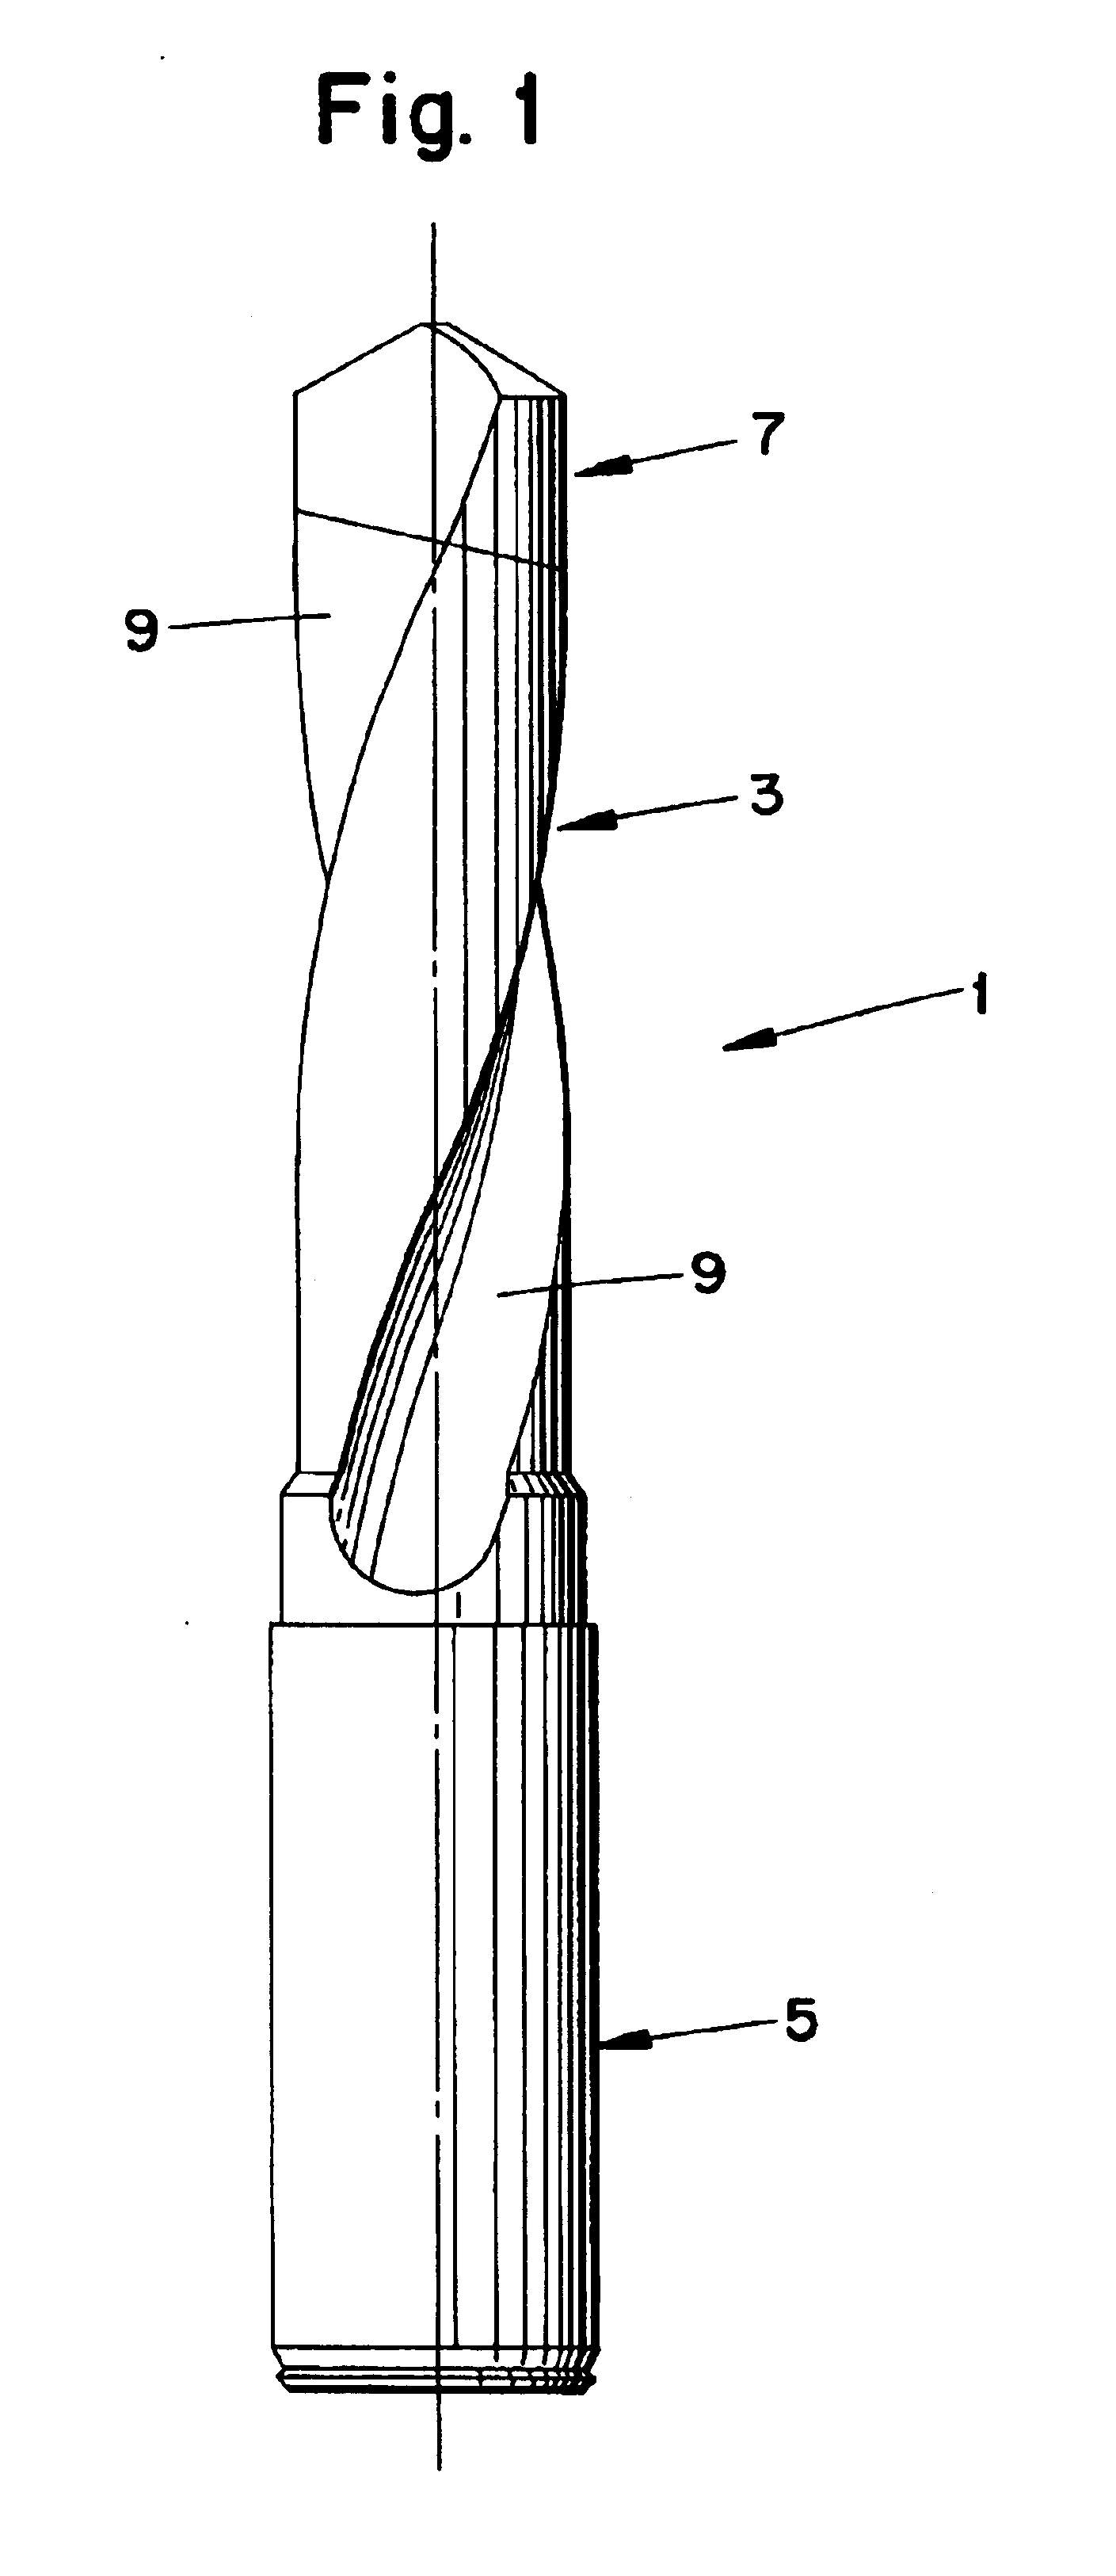 Rotatable tool having a replaceable cutting tip secured by a dovetail coupling